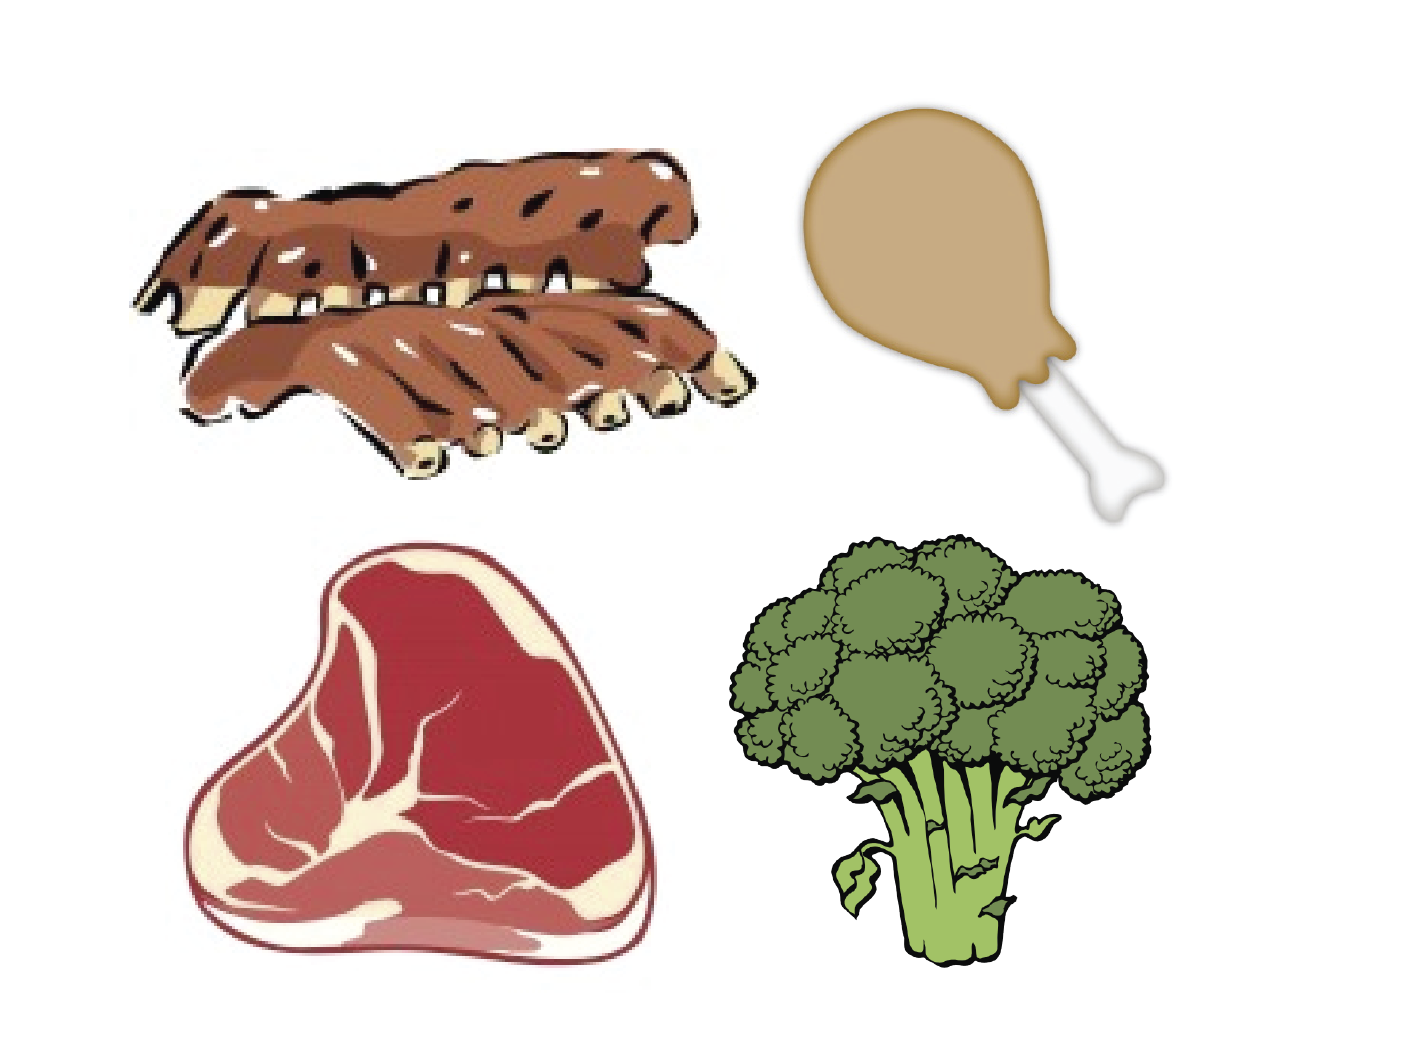 Meat clipart non vegetarian. Dinner party tips how